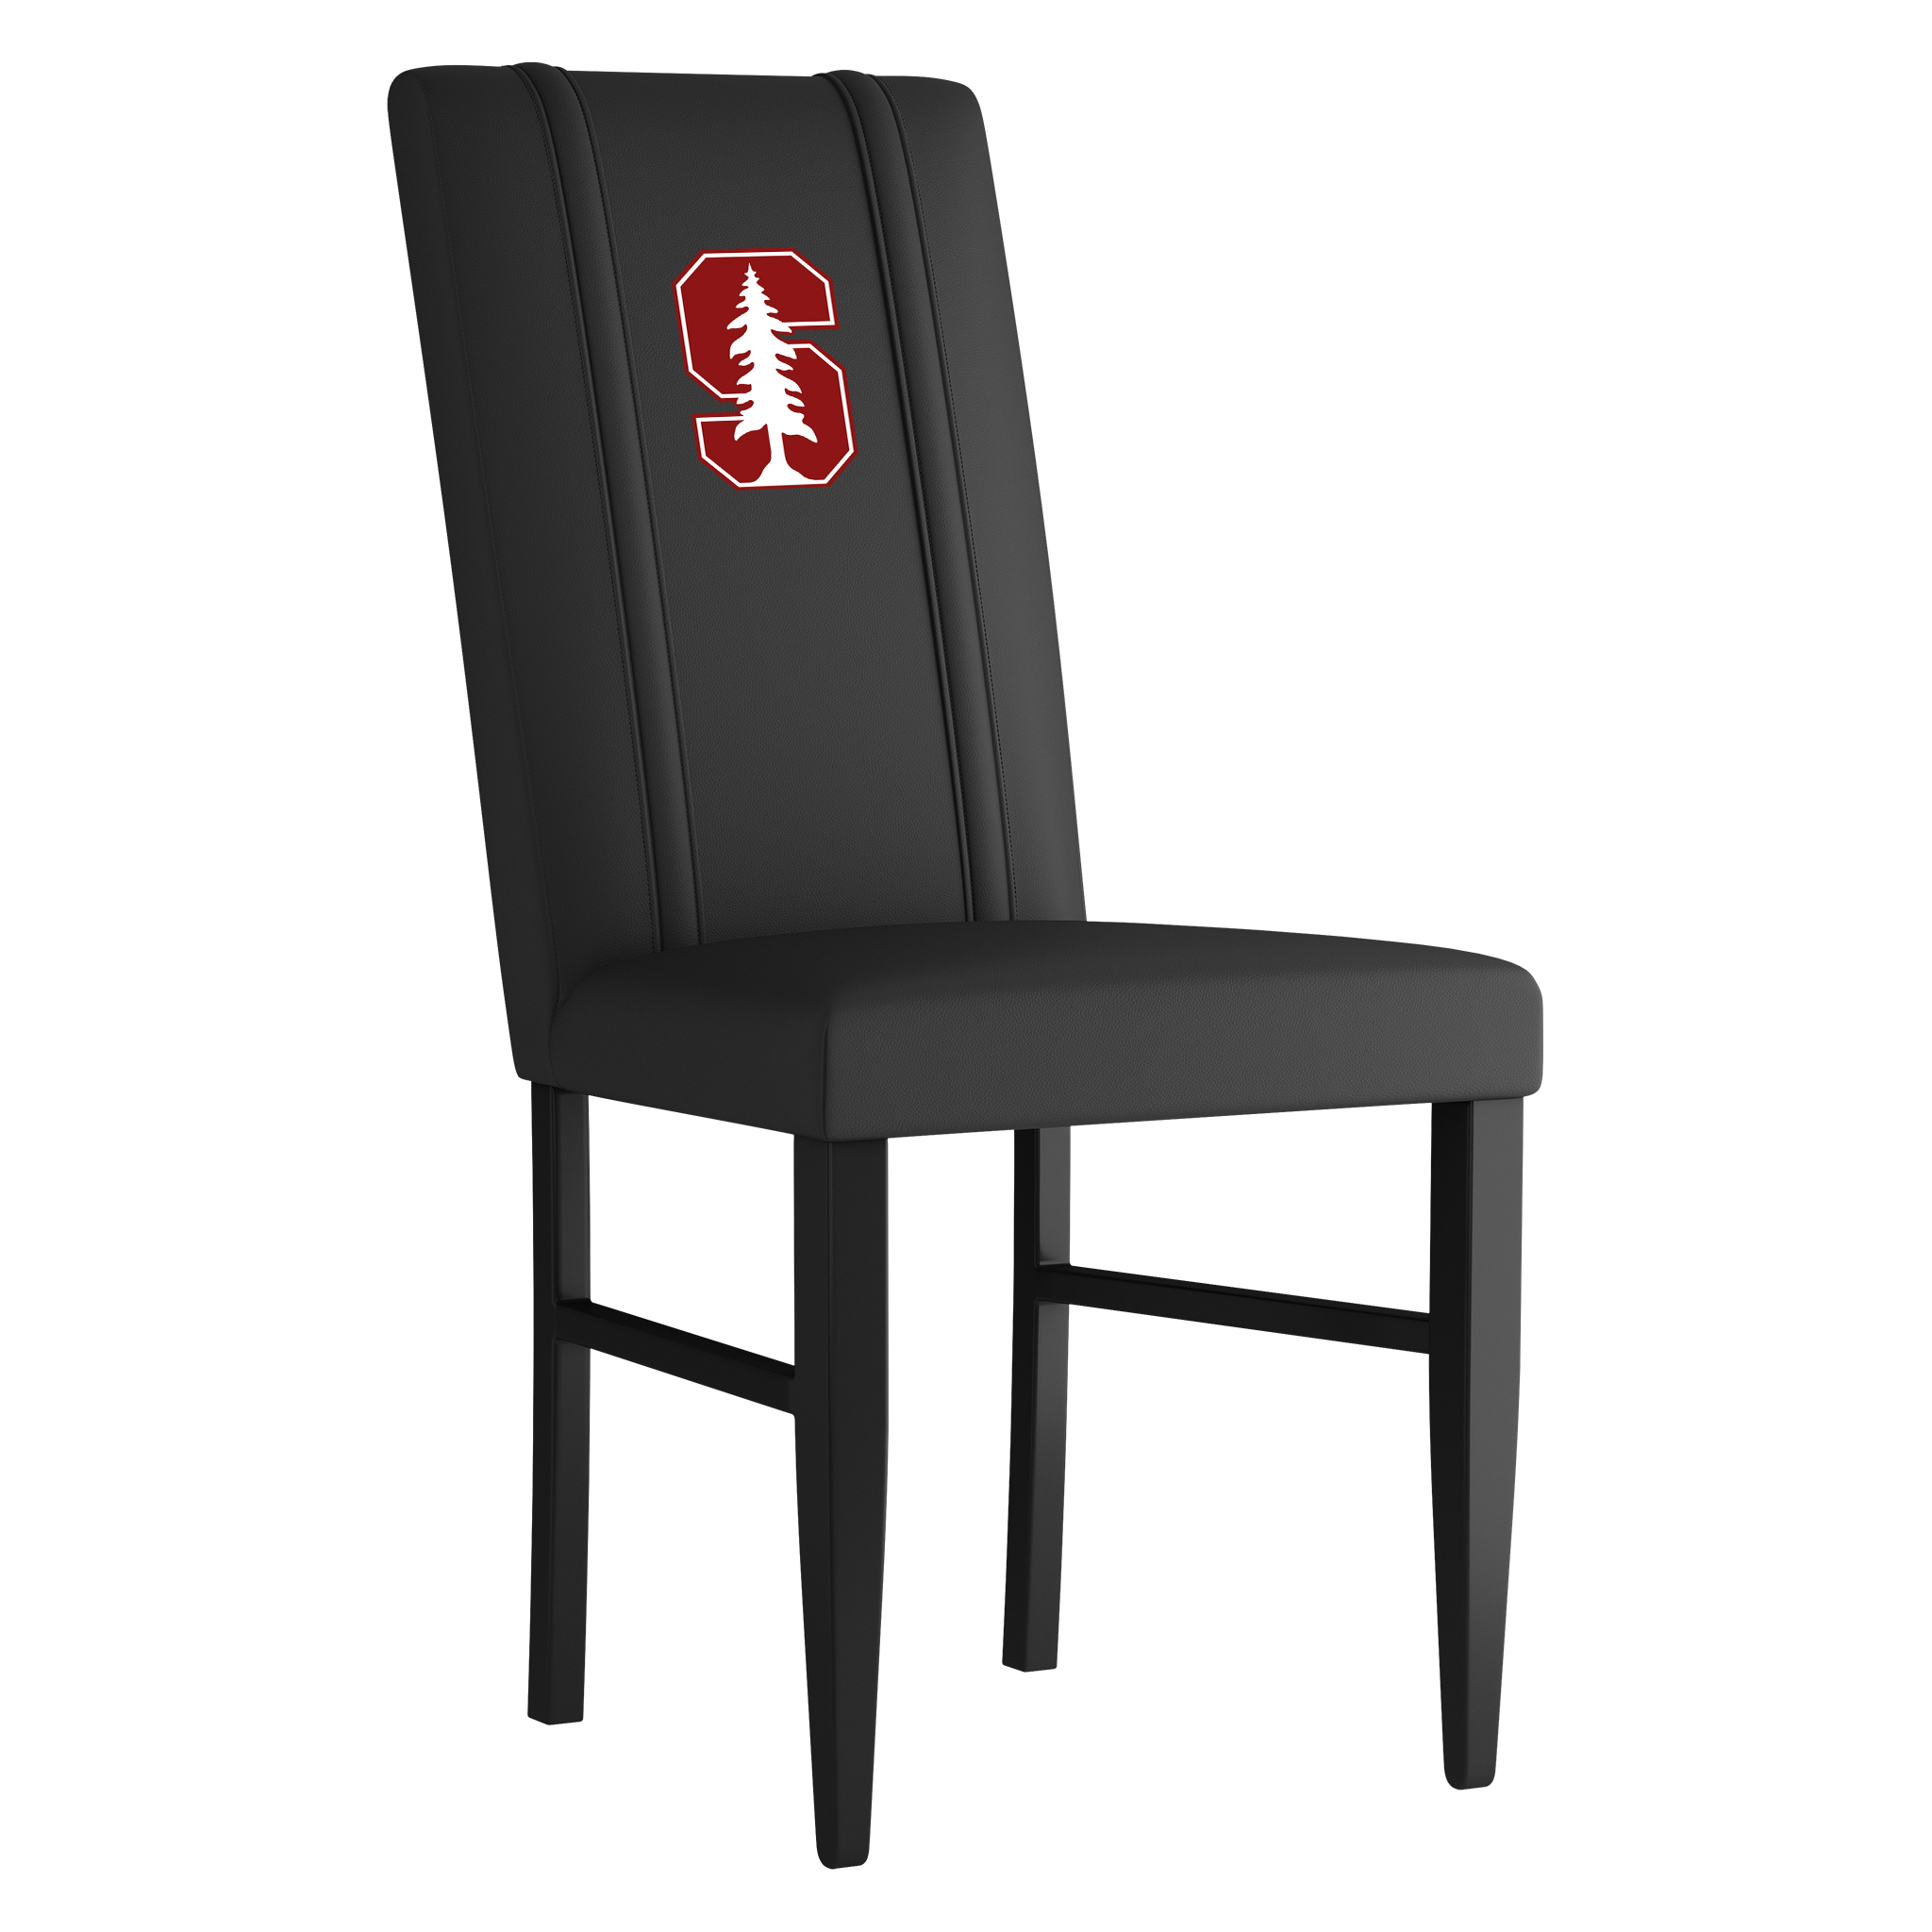 Stanford Cardinals Side Chair 2000 With Stanford Cardinals Logo